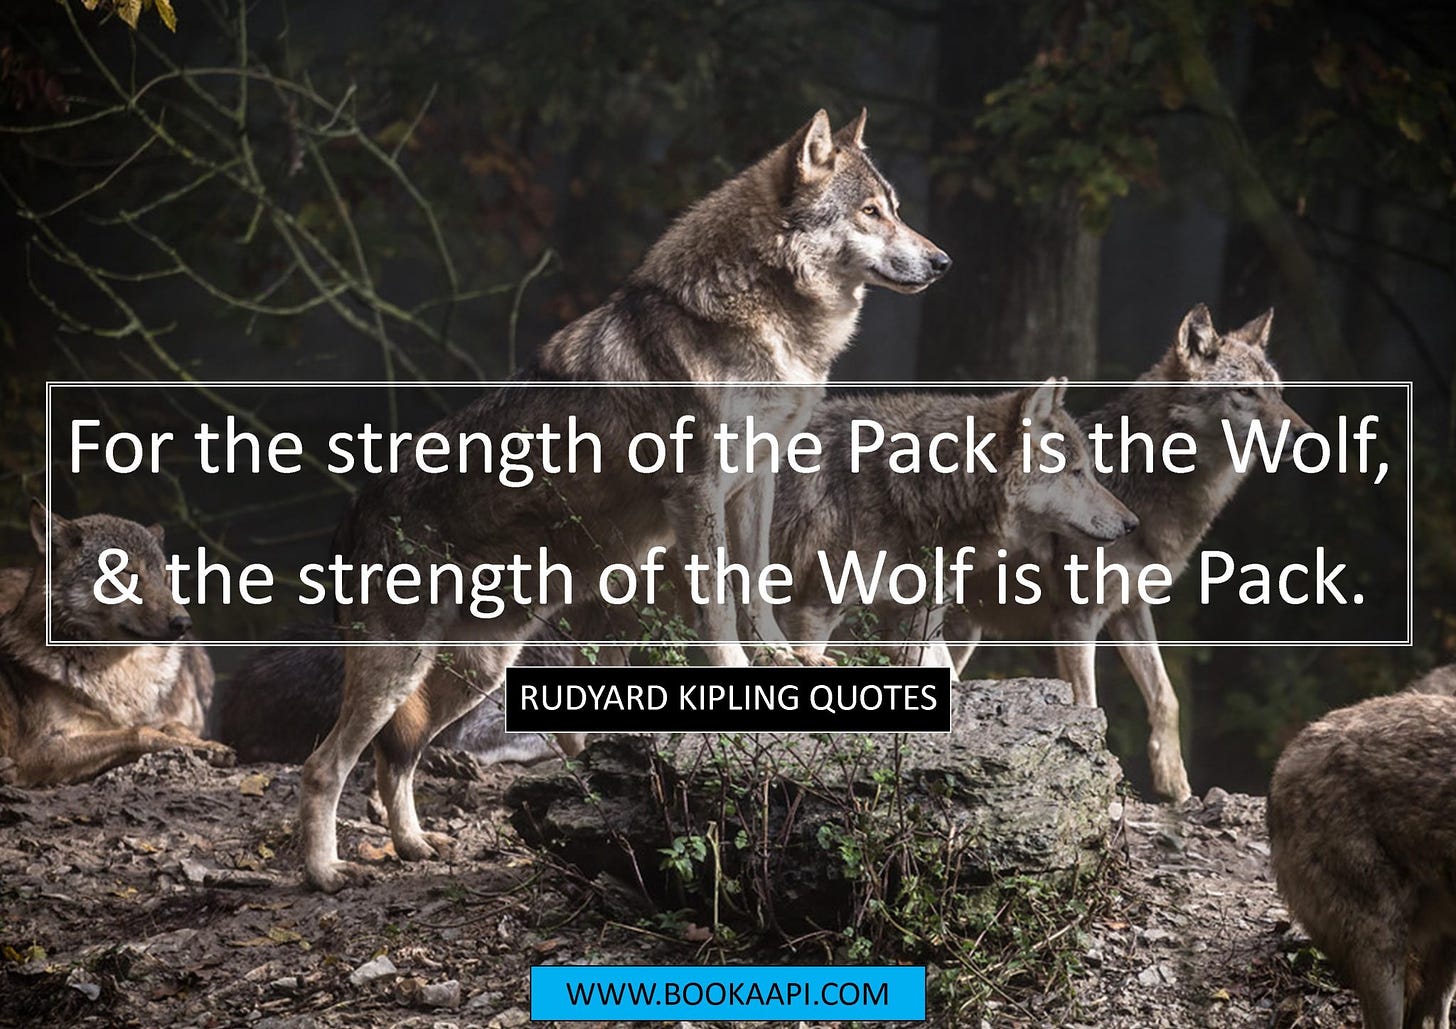 9 Amazing Rudyard Kipling Quotes from The Jungle Book